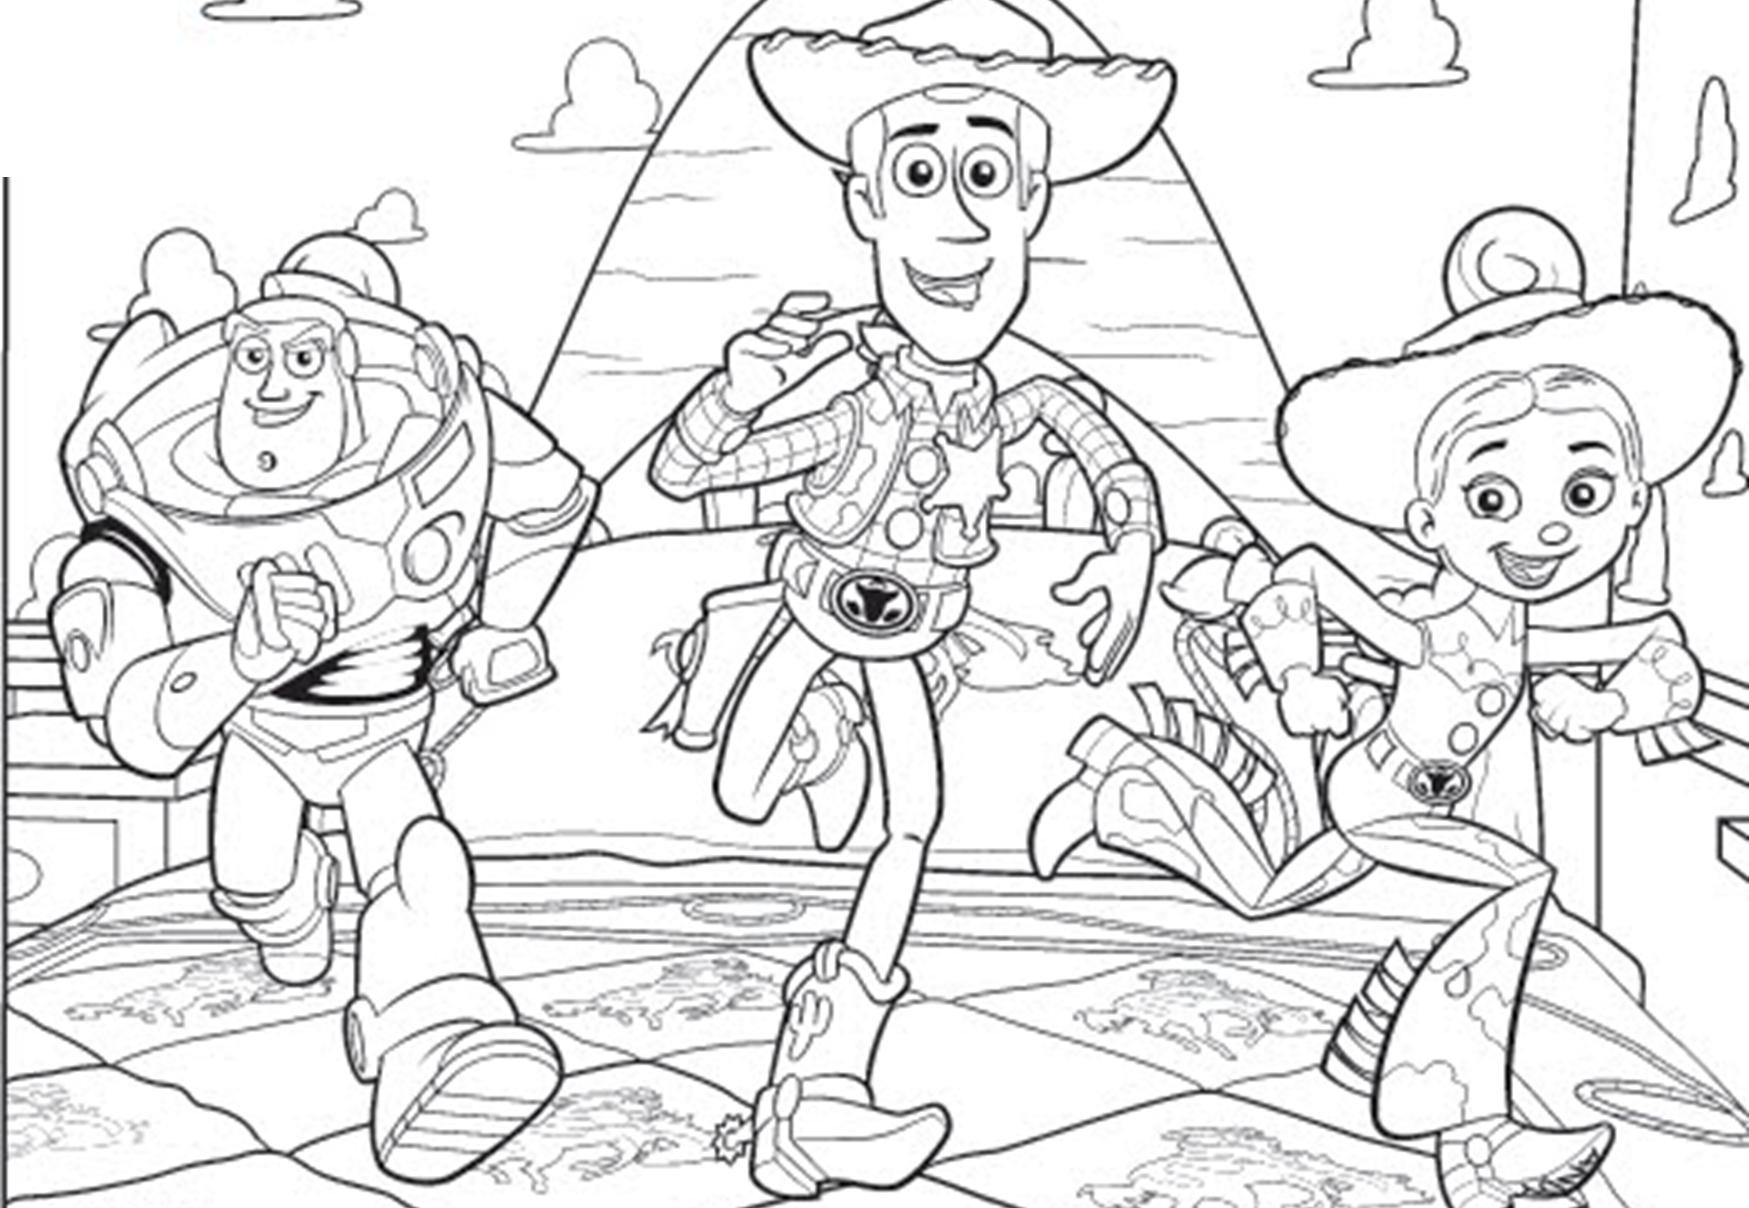 toy-story-printable-coloring-pages-printable-world-holiday